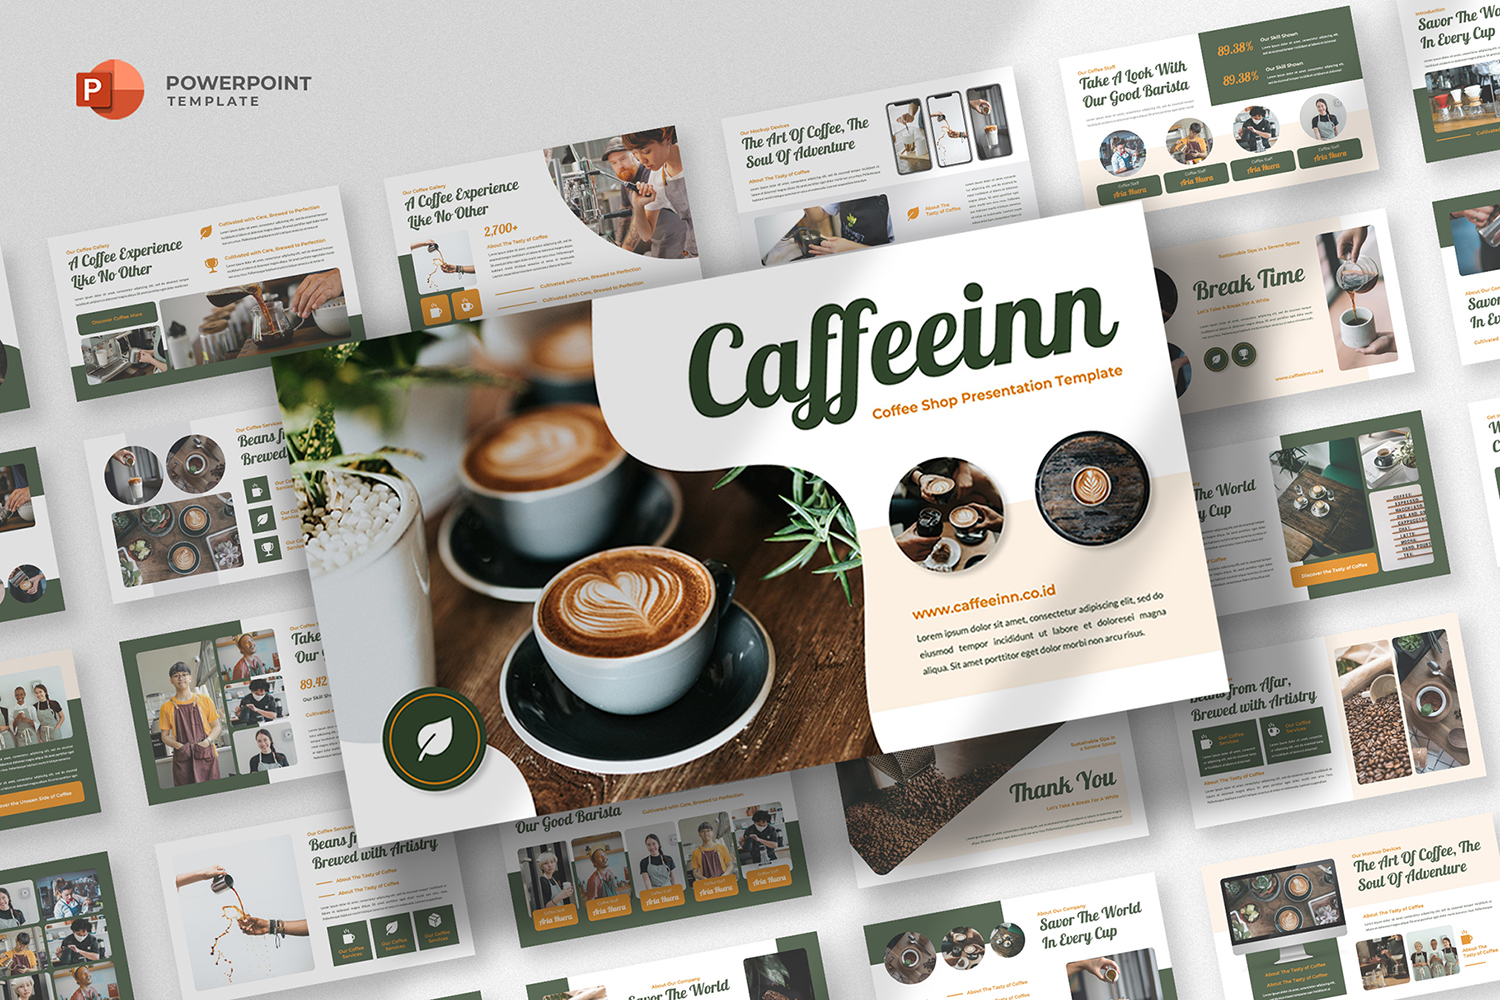 Caffeein - Coffee Business Powerpoint Template